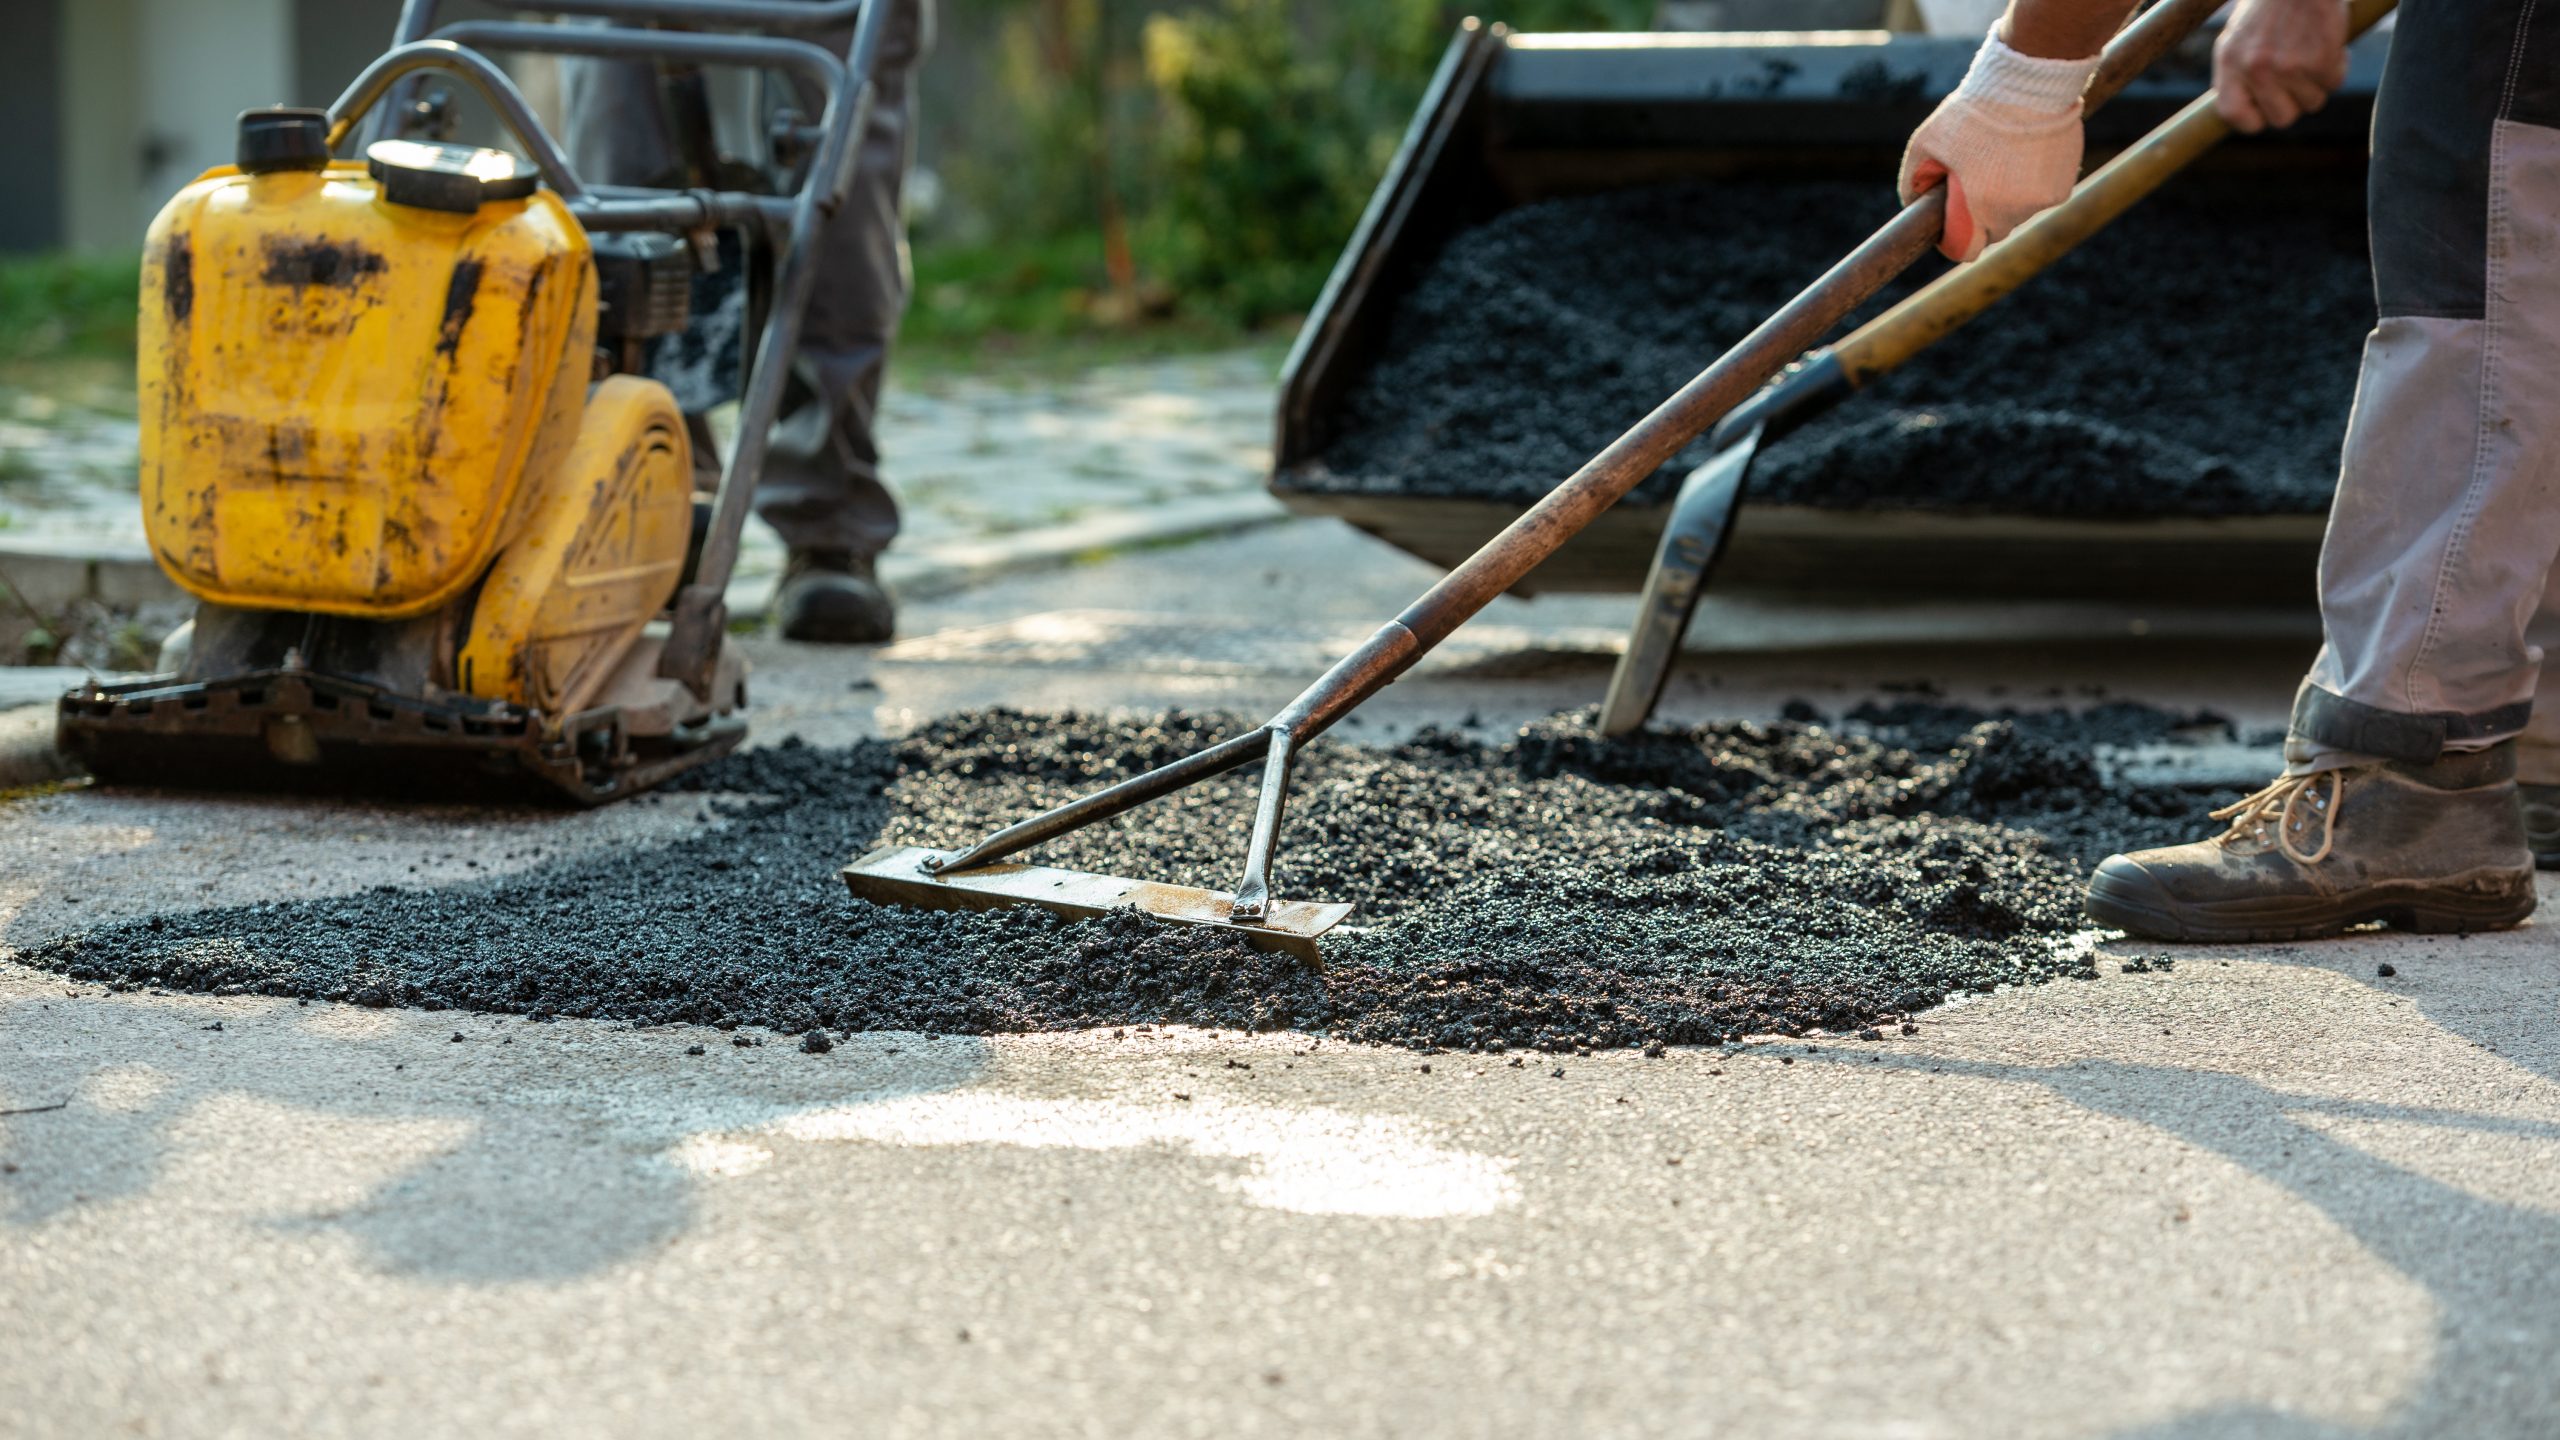 Low angle view of two workers arranging fresh asphalt mix with rakes and shovel to patch a bump in the road with machinery by their side